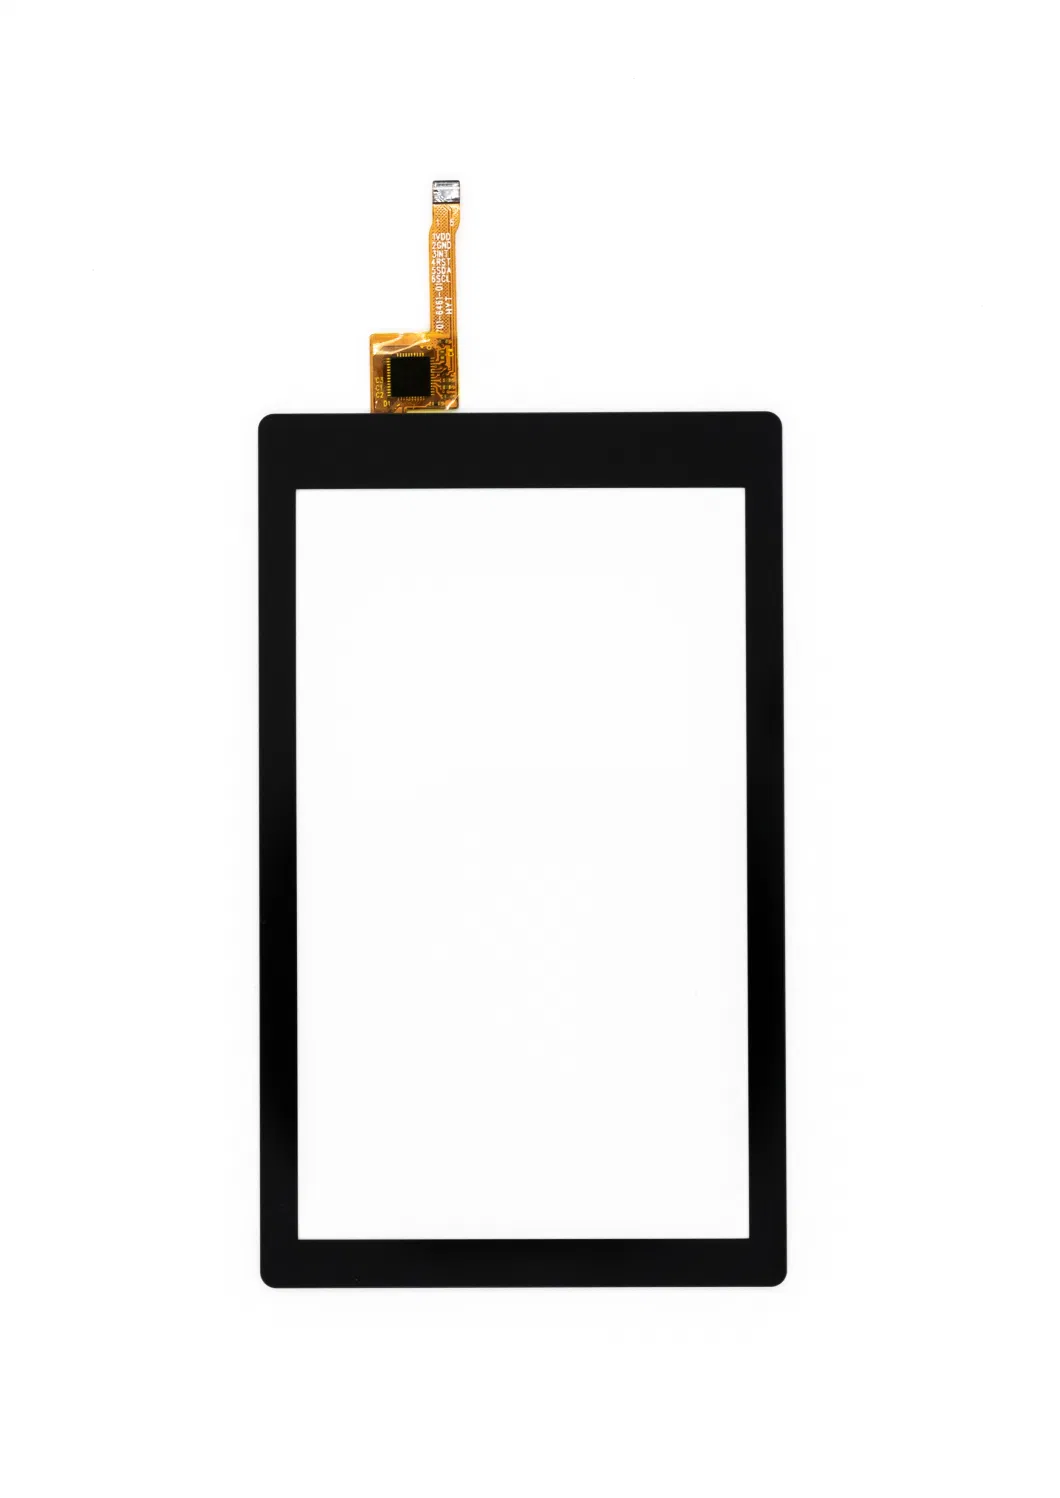 Custom 5inch Capacitive Touchscreen Panel for Your Touch System